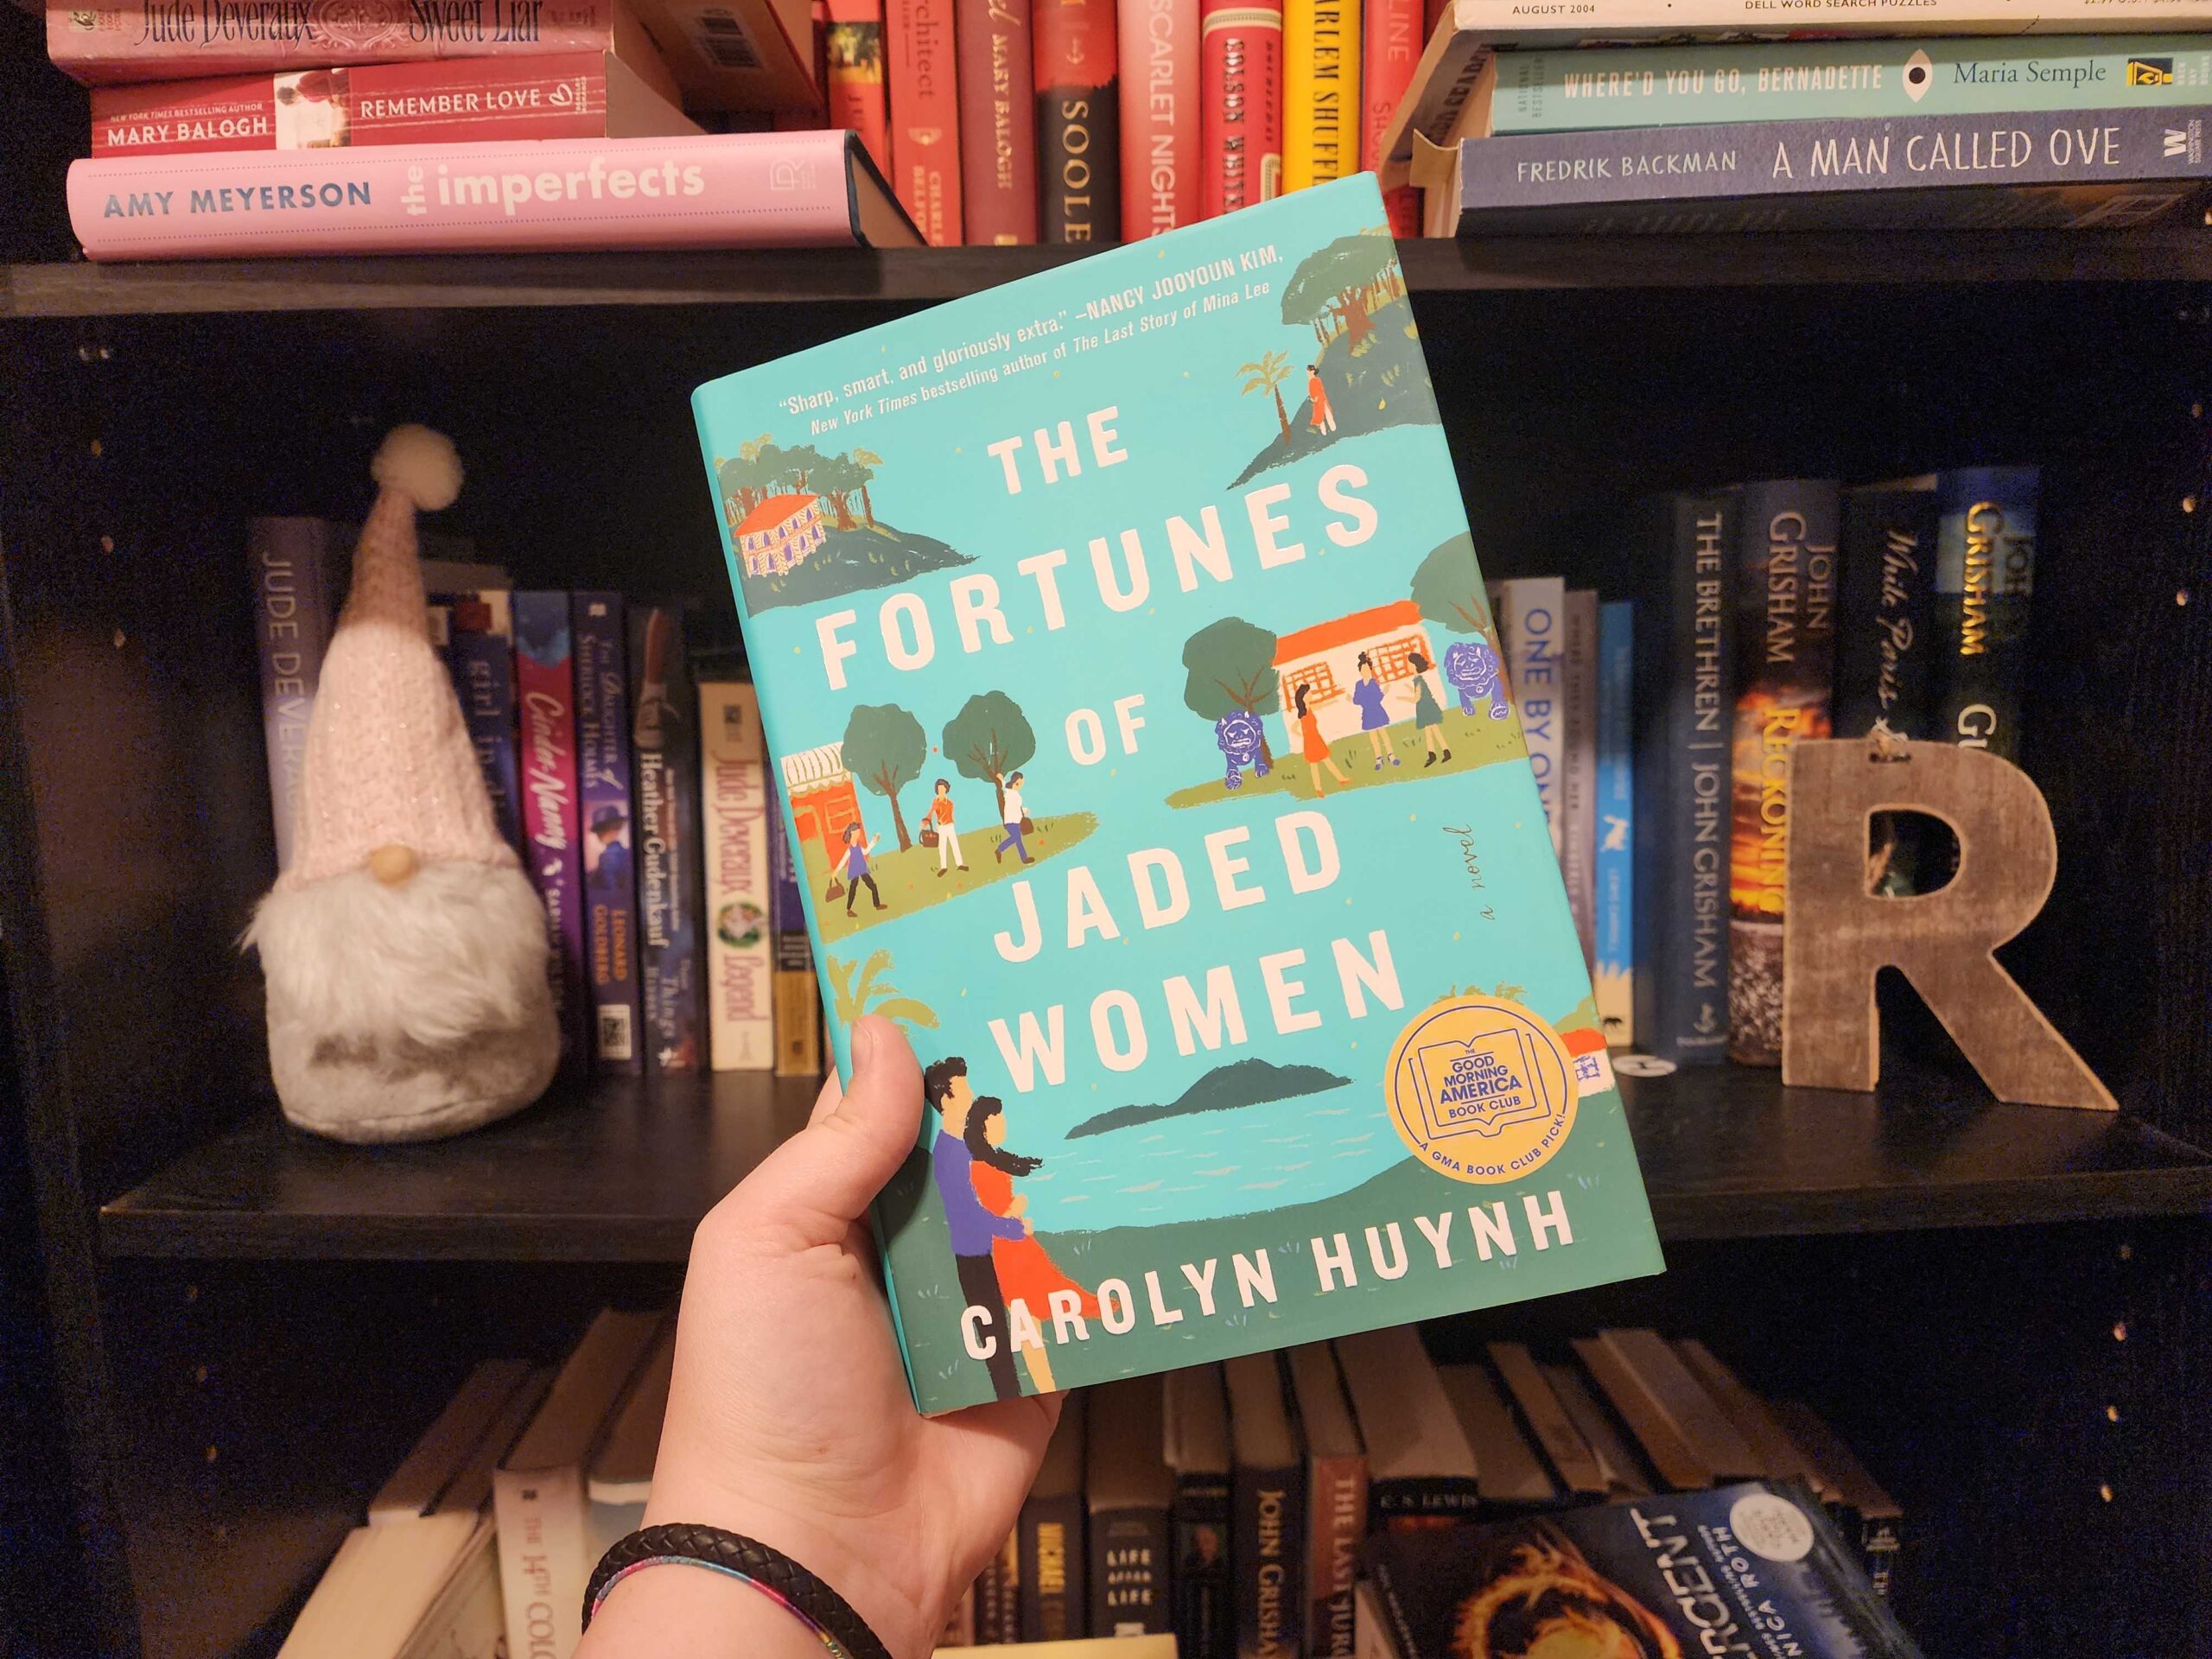 the fortunes of jaded women by carolyn huynh